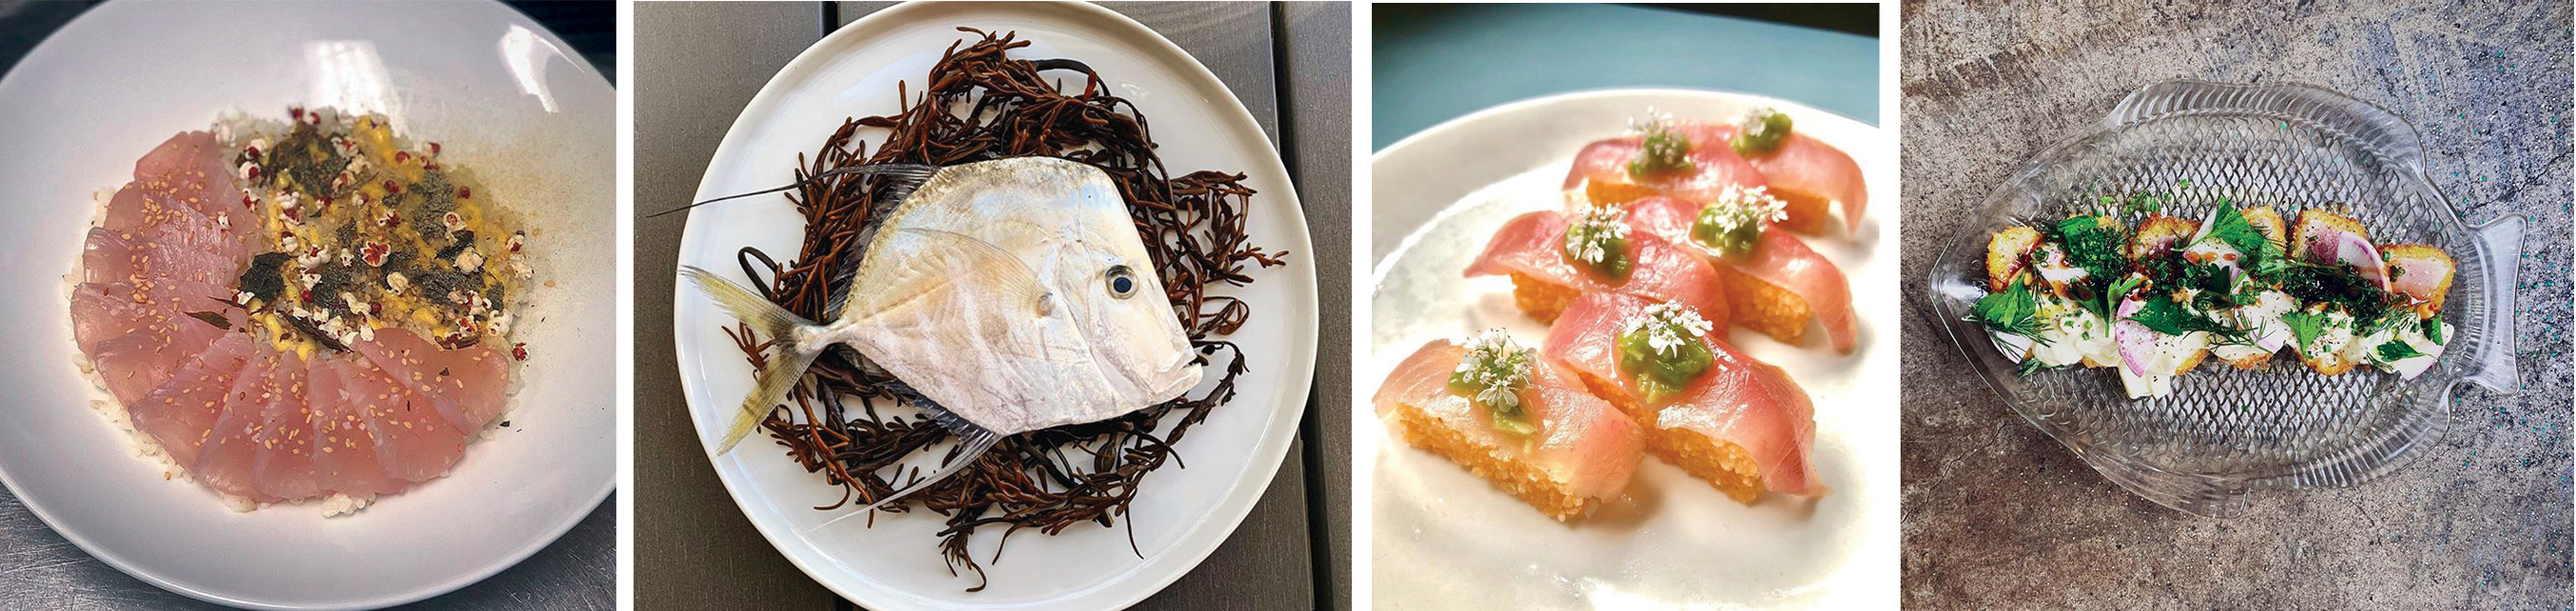 Chefs and restaurants proudly share their Abundant Seafood catches and compositions on their Instagram feeds: (left to right) king mackerel with Carolina Gold rice middlins and popped sorghum at FIG, a whole lookdown jack destined for someone’s dinner at Delaney Oyster House, banded rudderfish at Chubby Fish, and albacore tuna katsu at Jackrabbit Filly